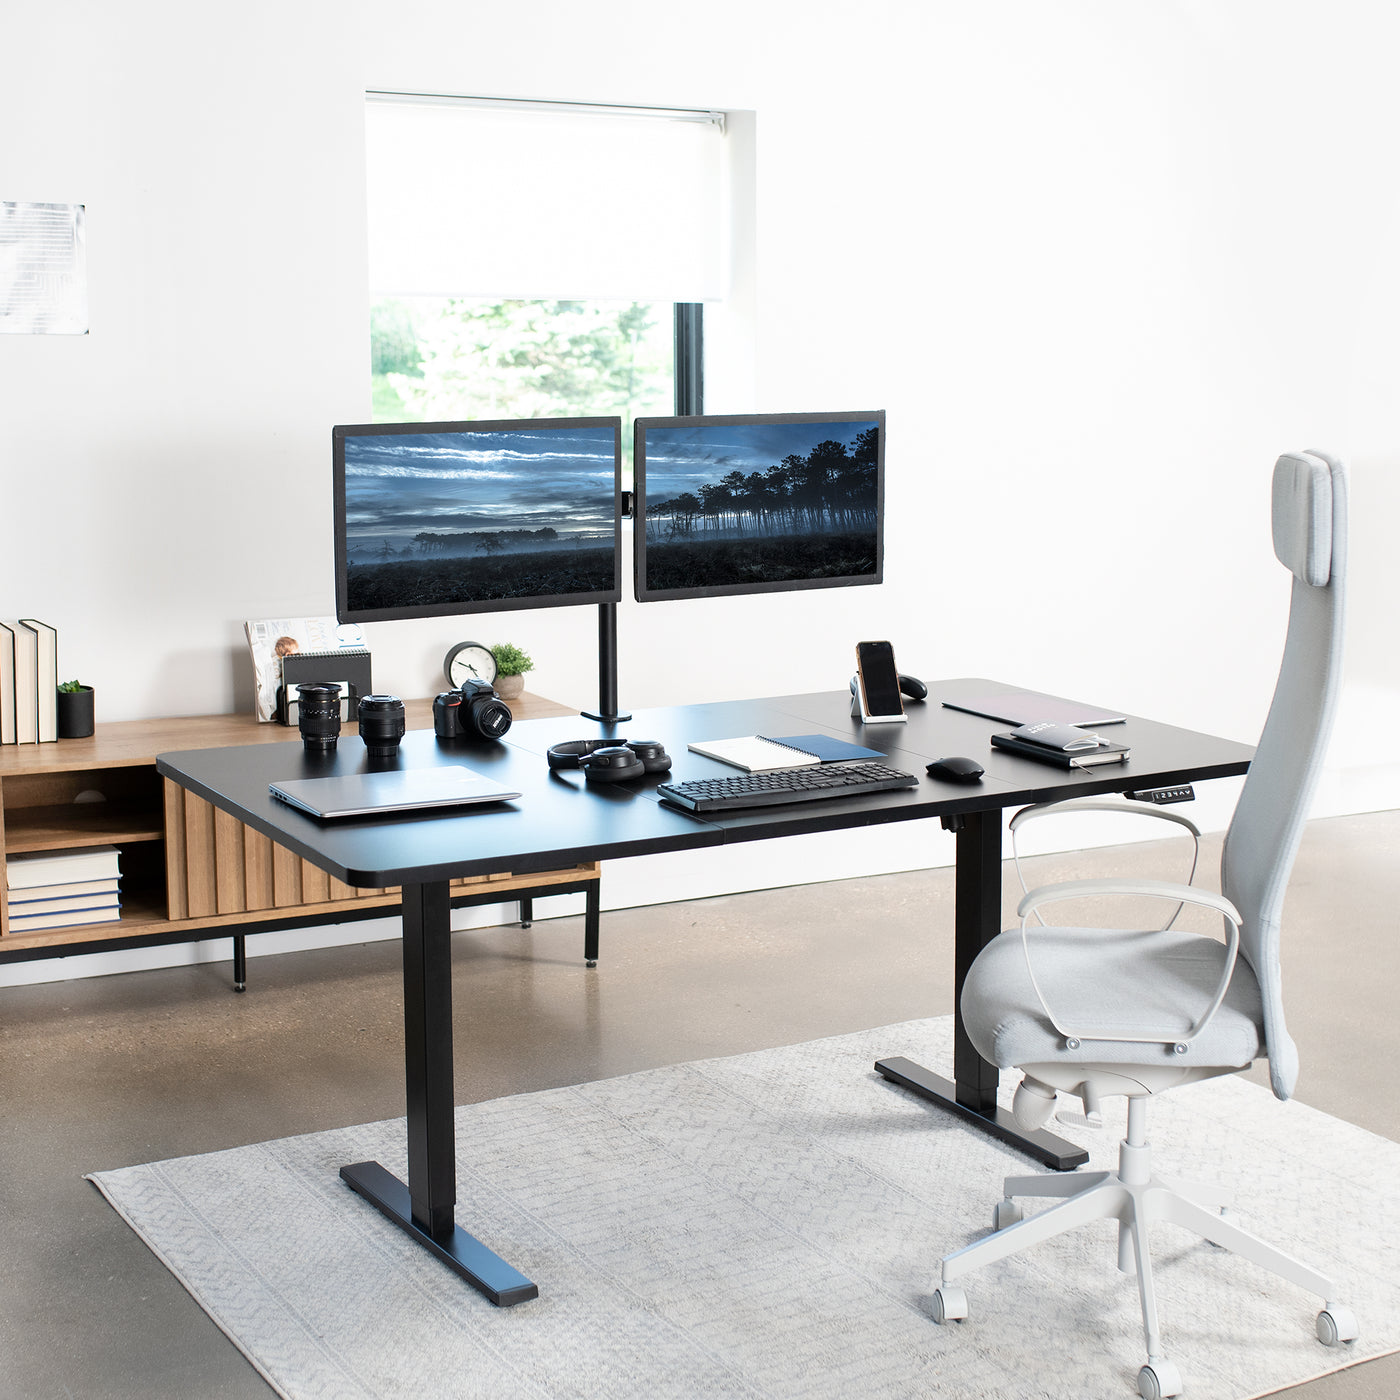 Minimalist office space with an electric sit-to-stand desk supporting a hefty weight.